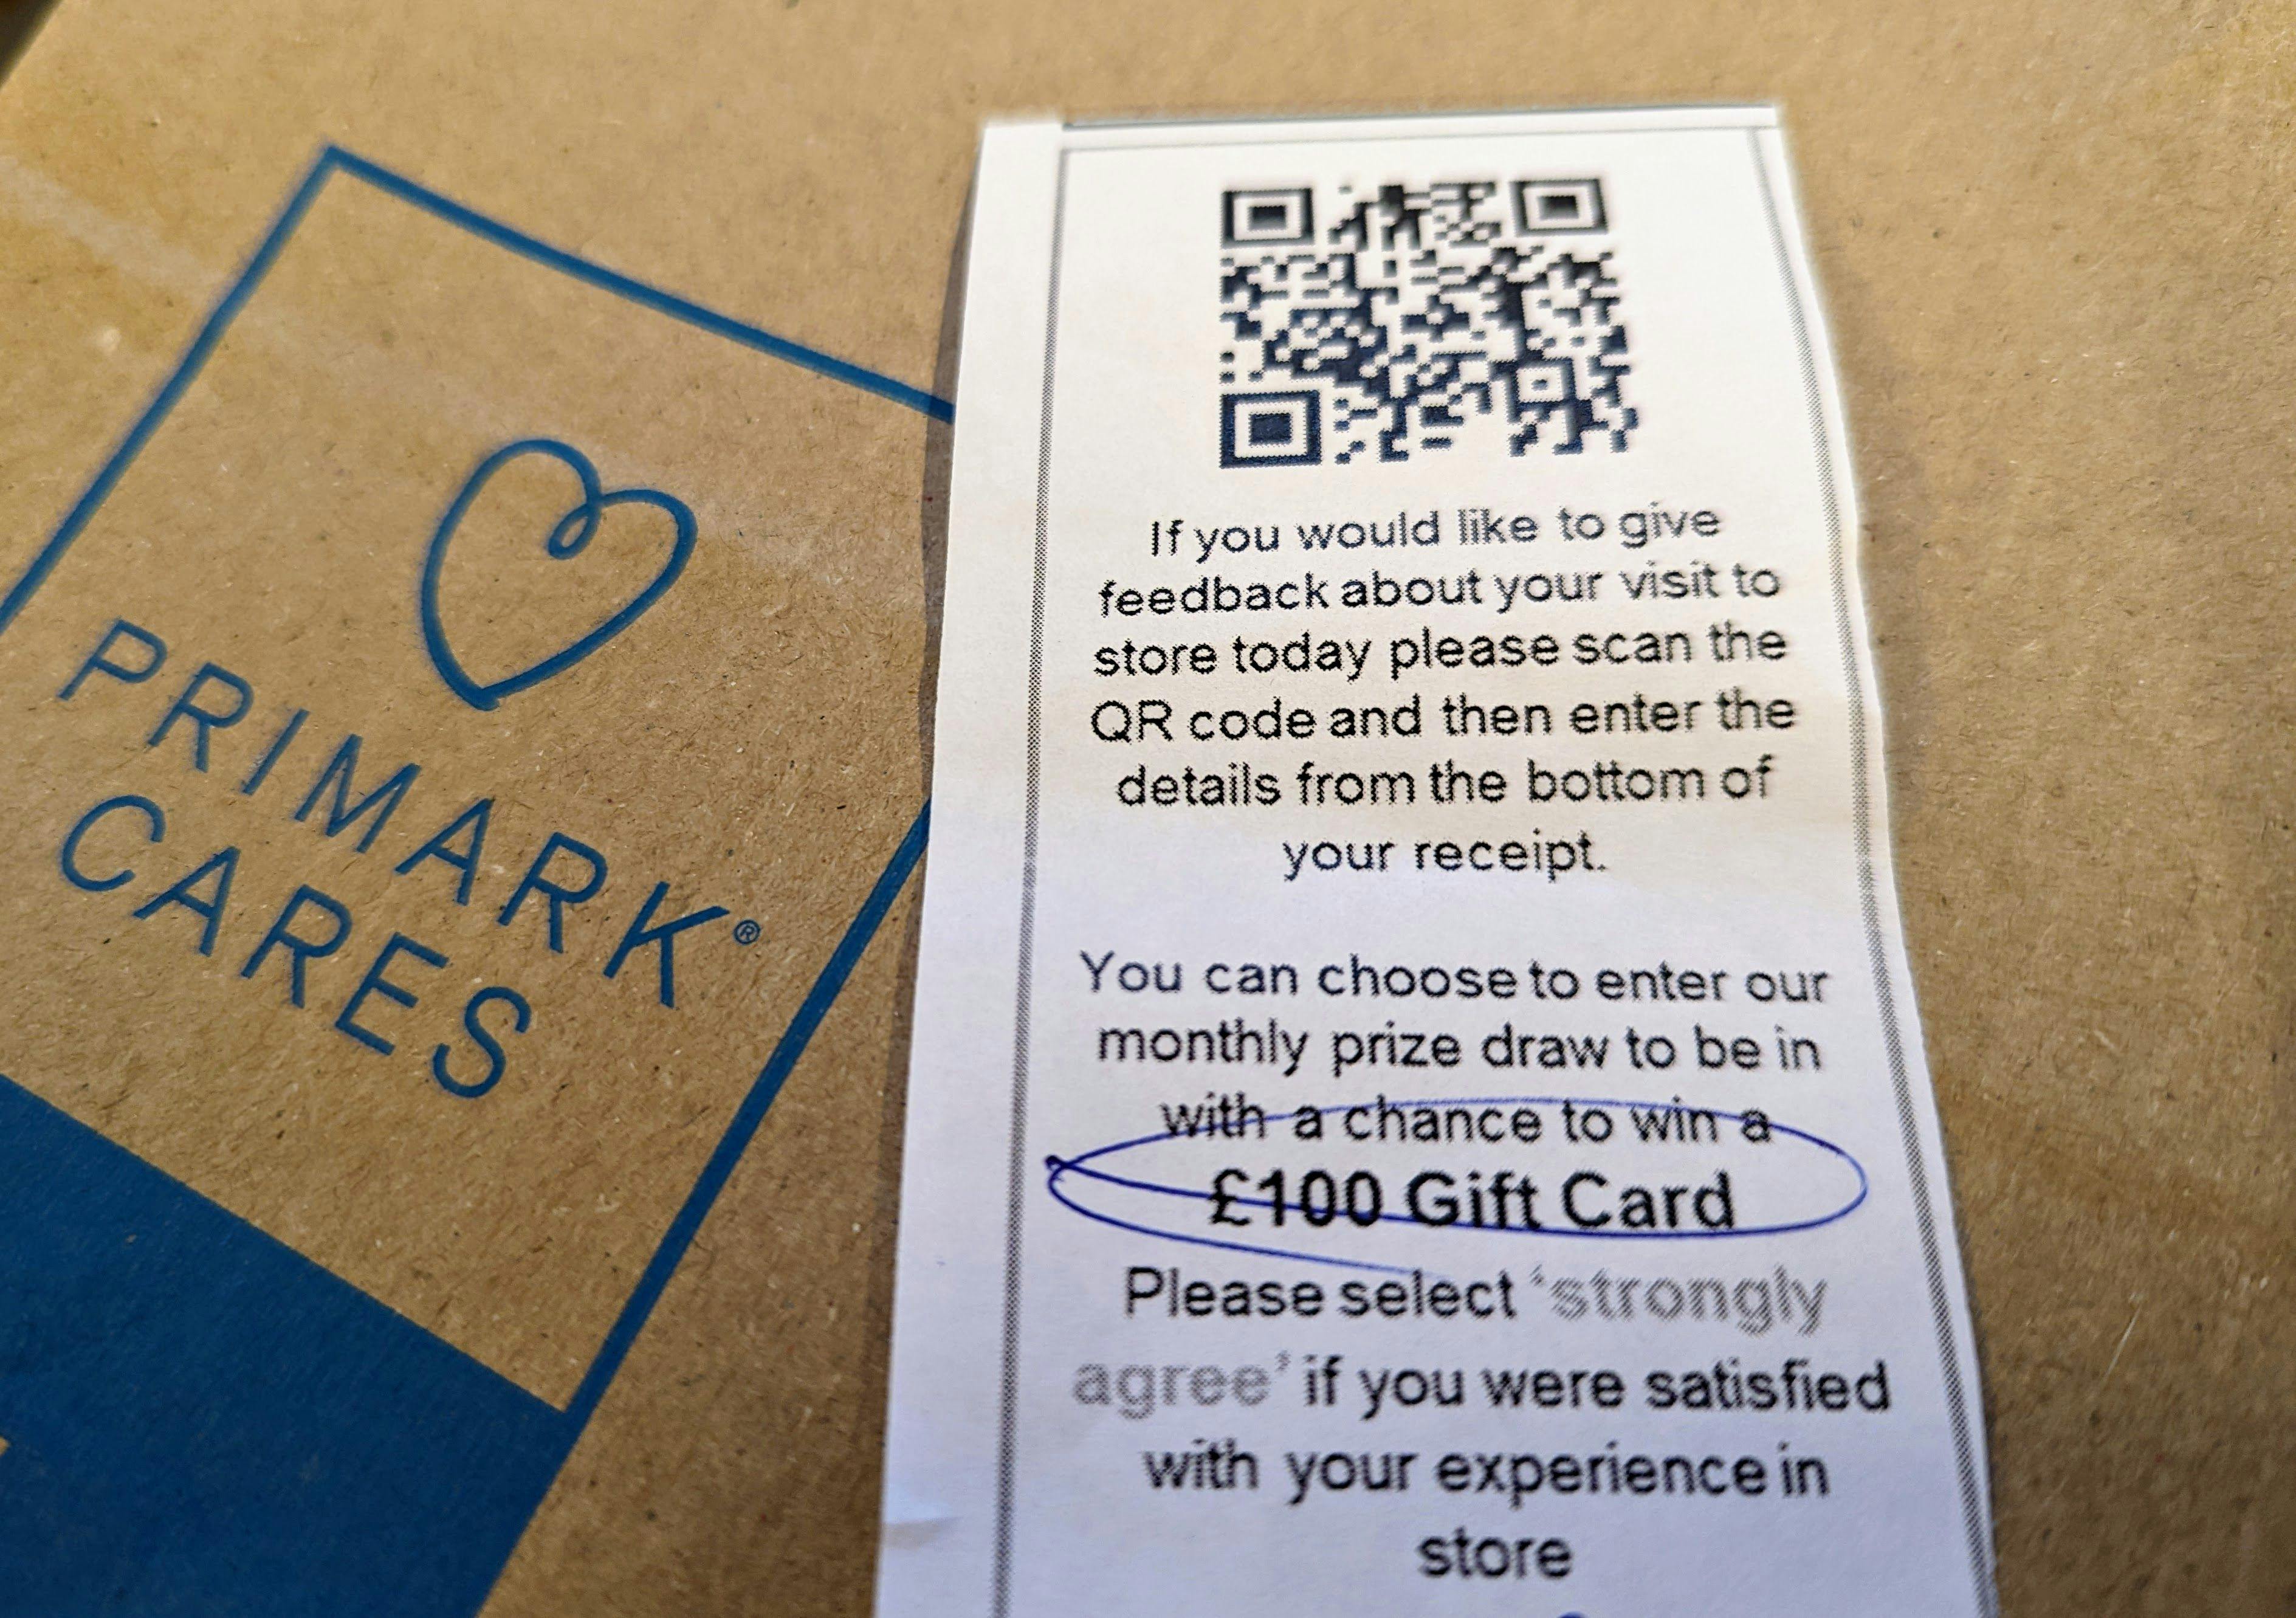 A note handed out in a Primark store asking customers to pick a particular survey option